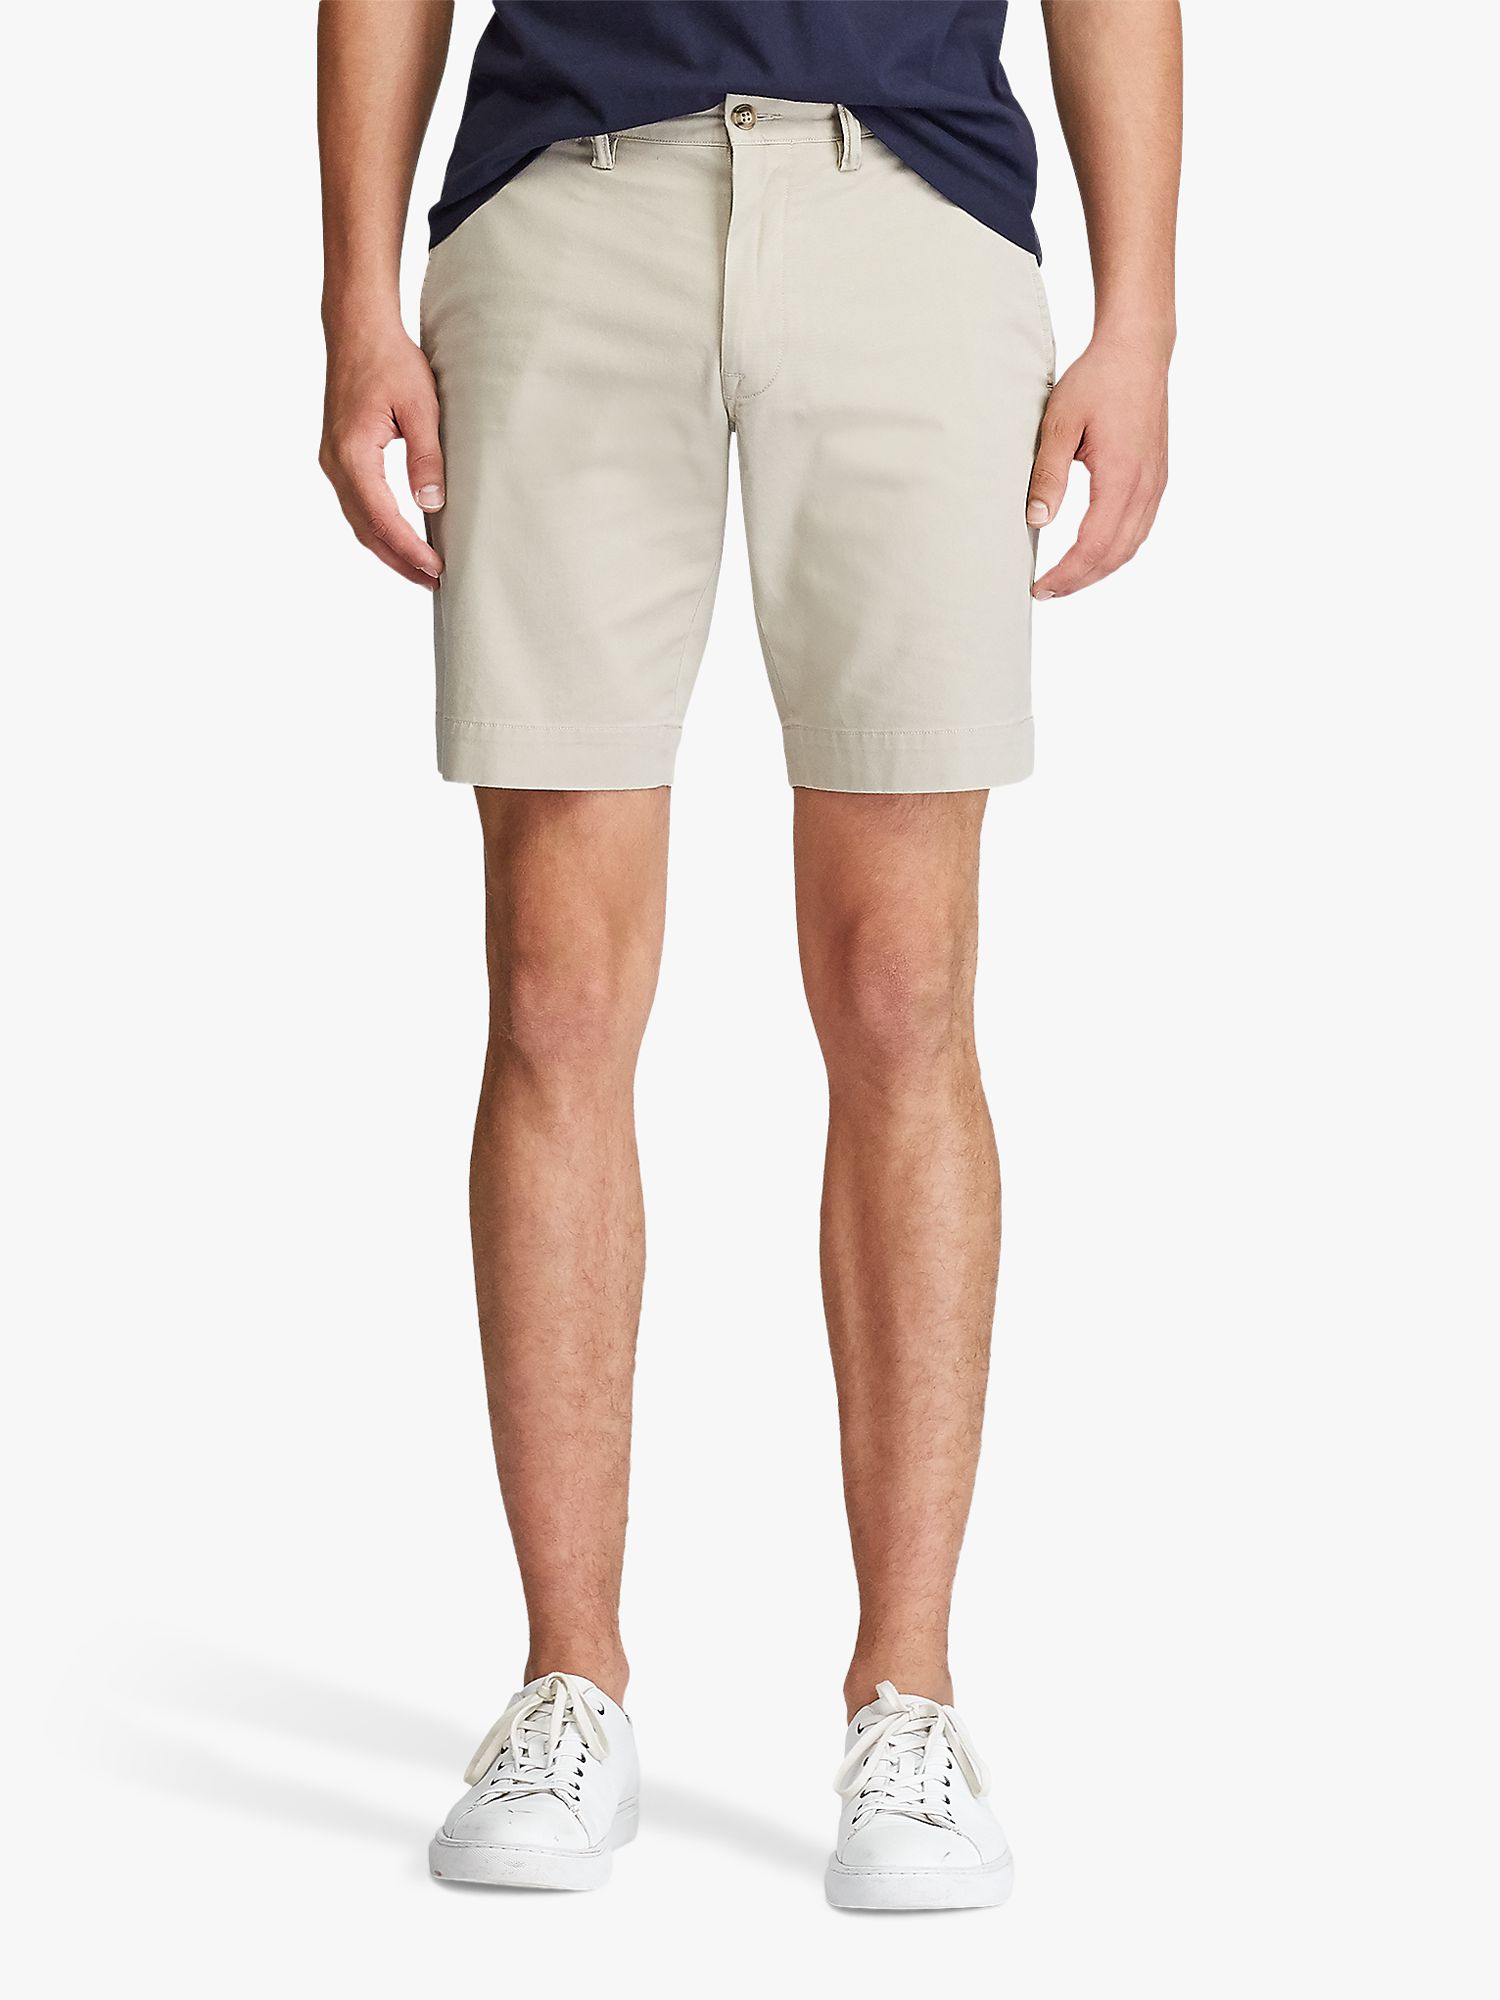 Polo Ralph Lauren Bedford Shorts at 